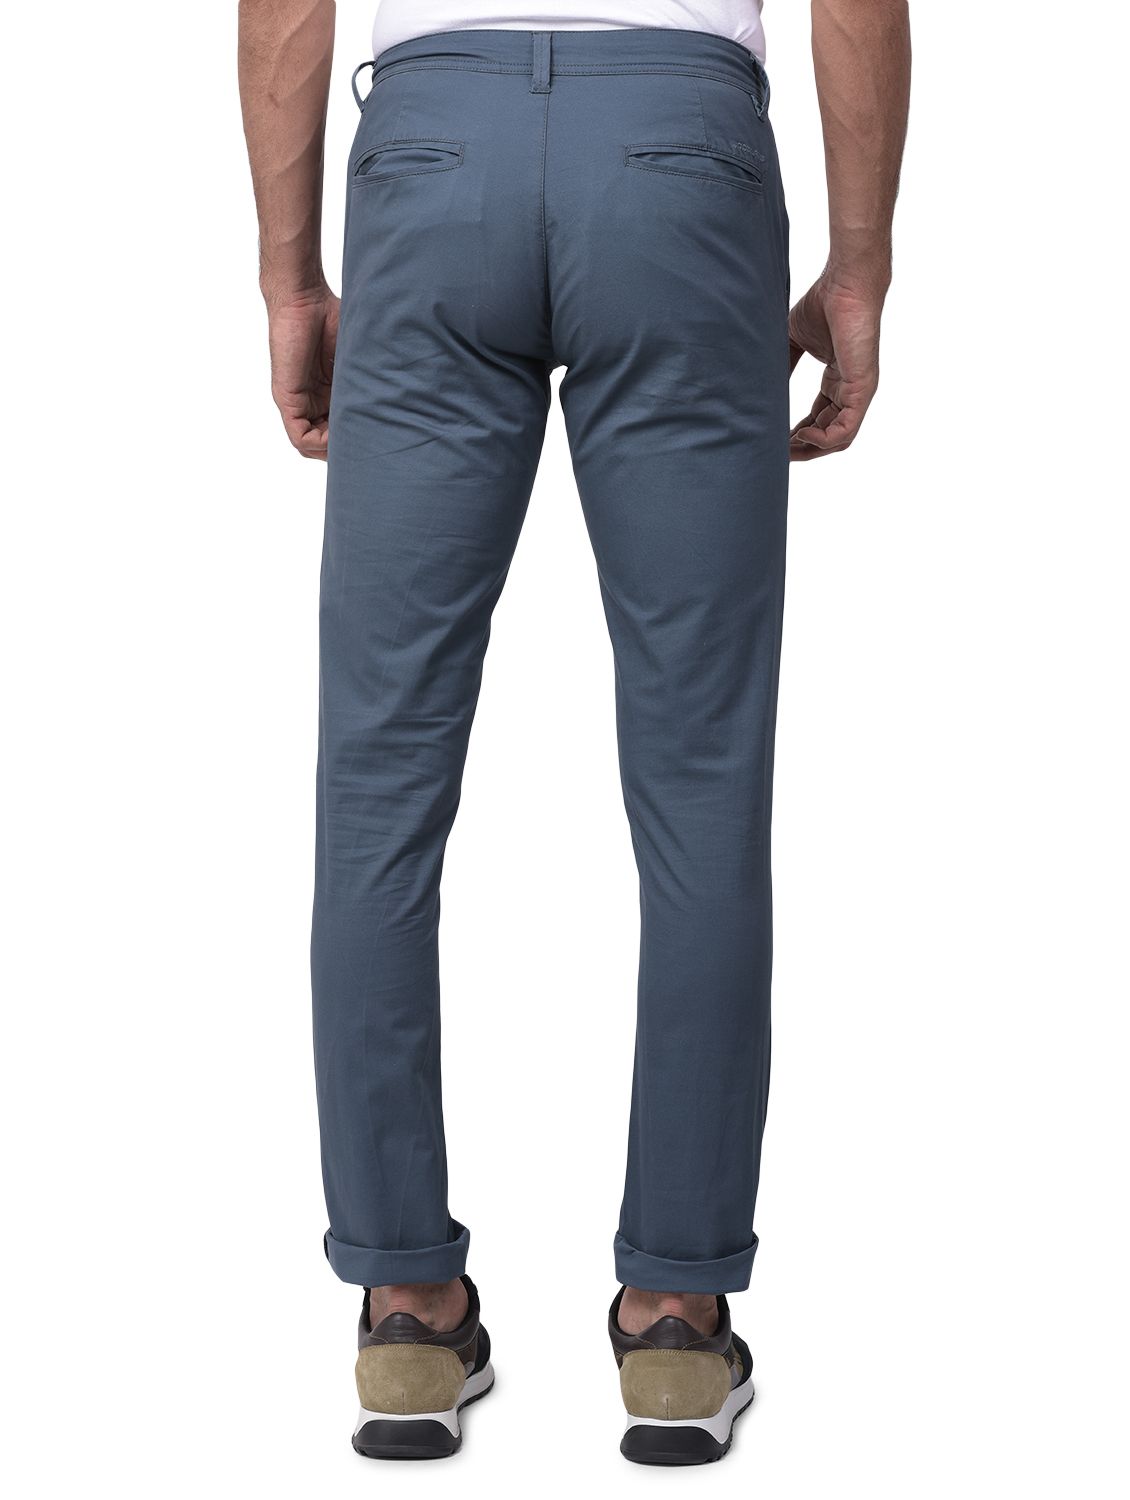 Indian teal chino trousers for men